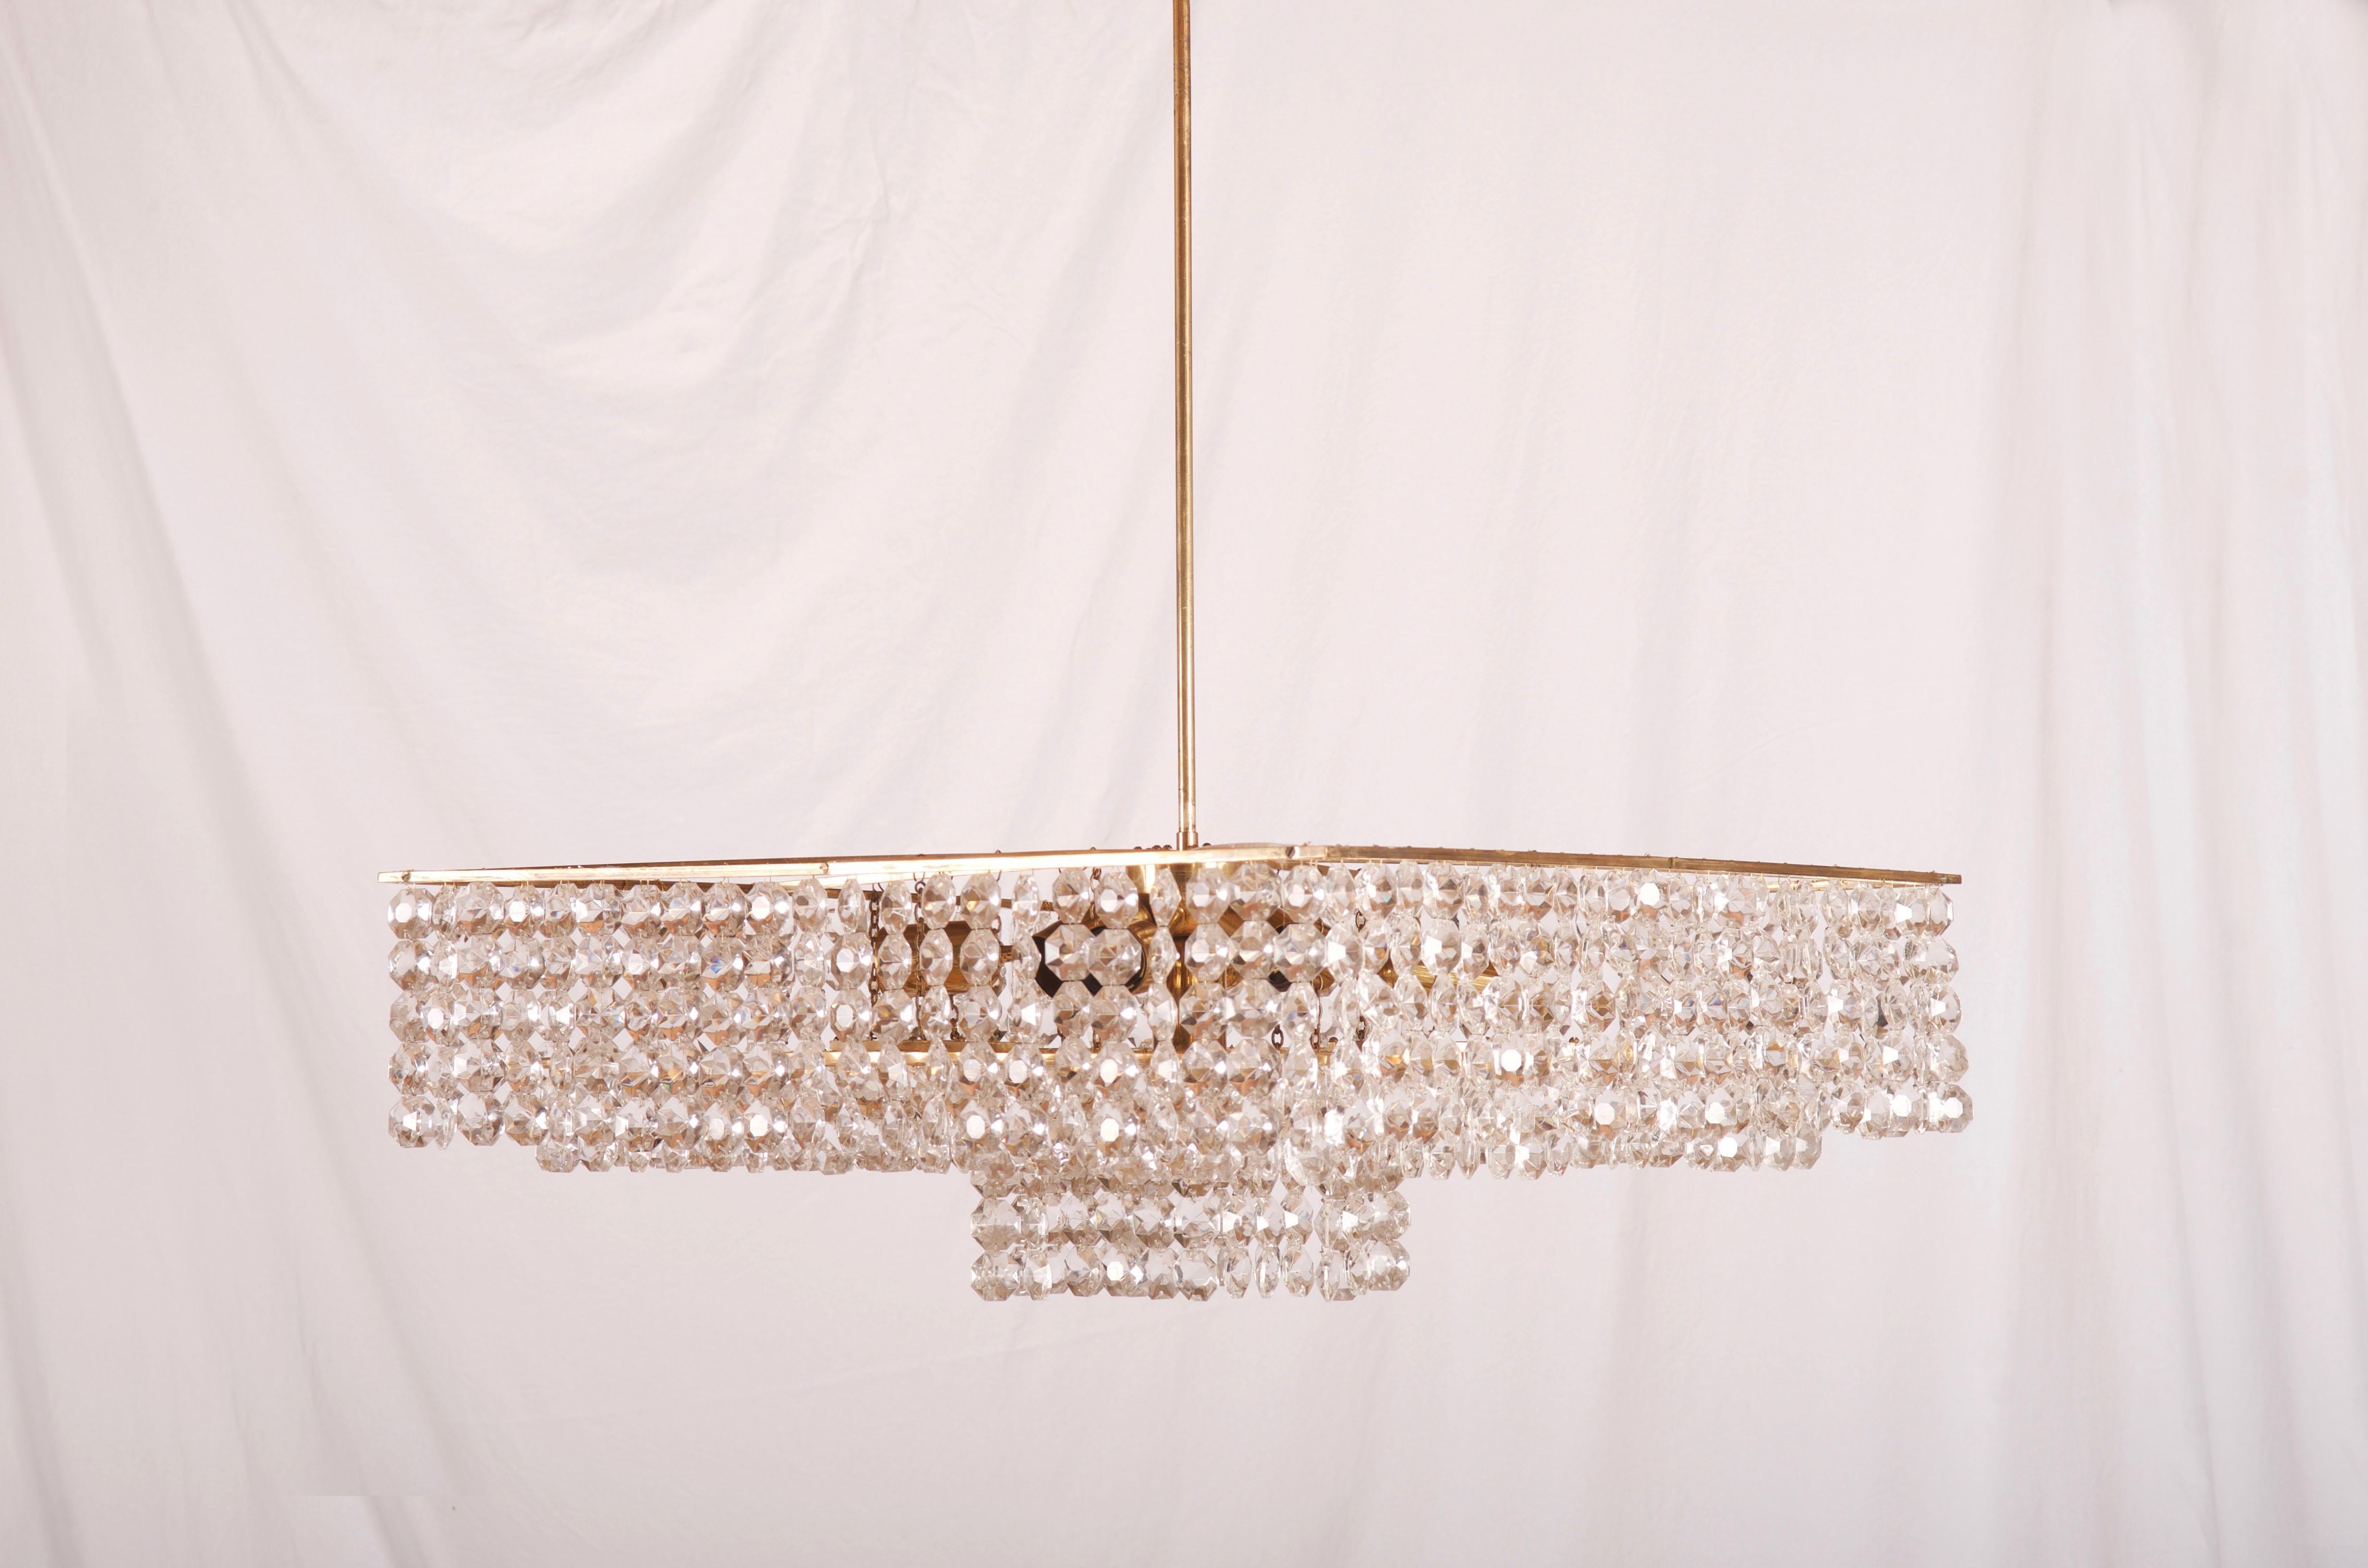 Austrian Midcentury Square Cut Crystal Chandelier For Sale